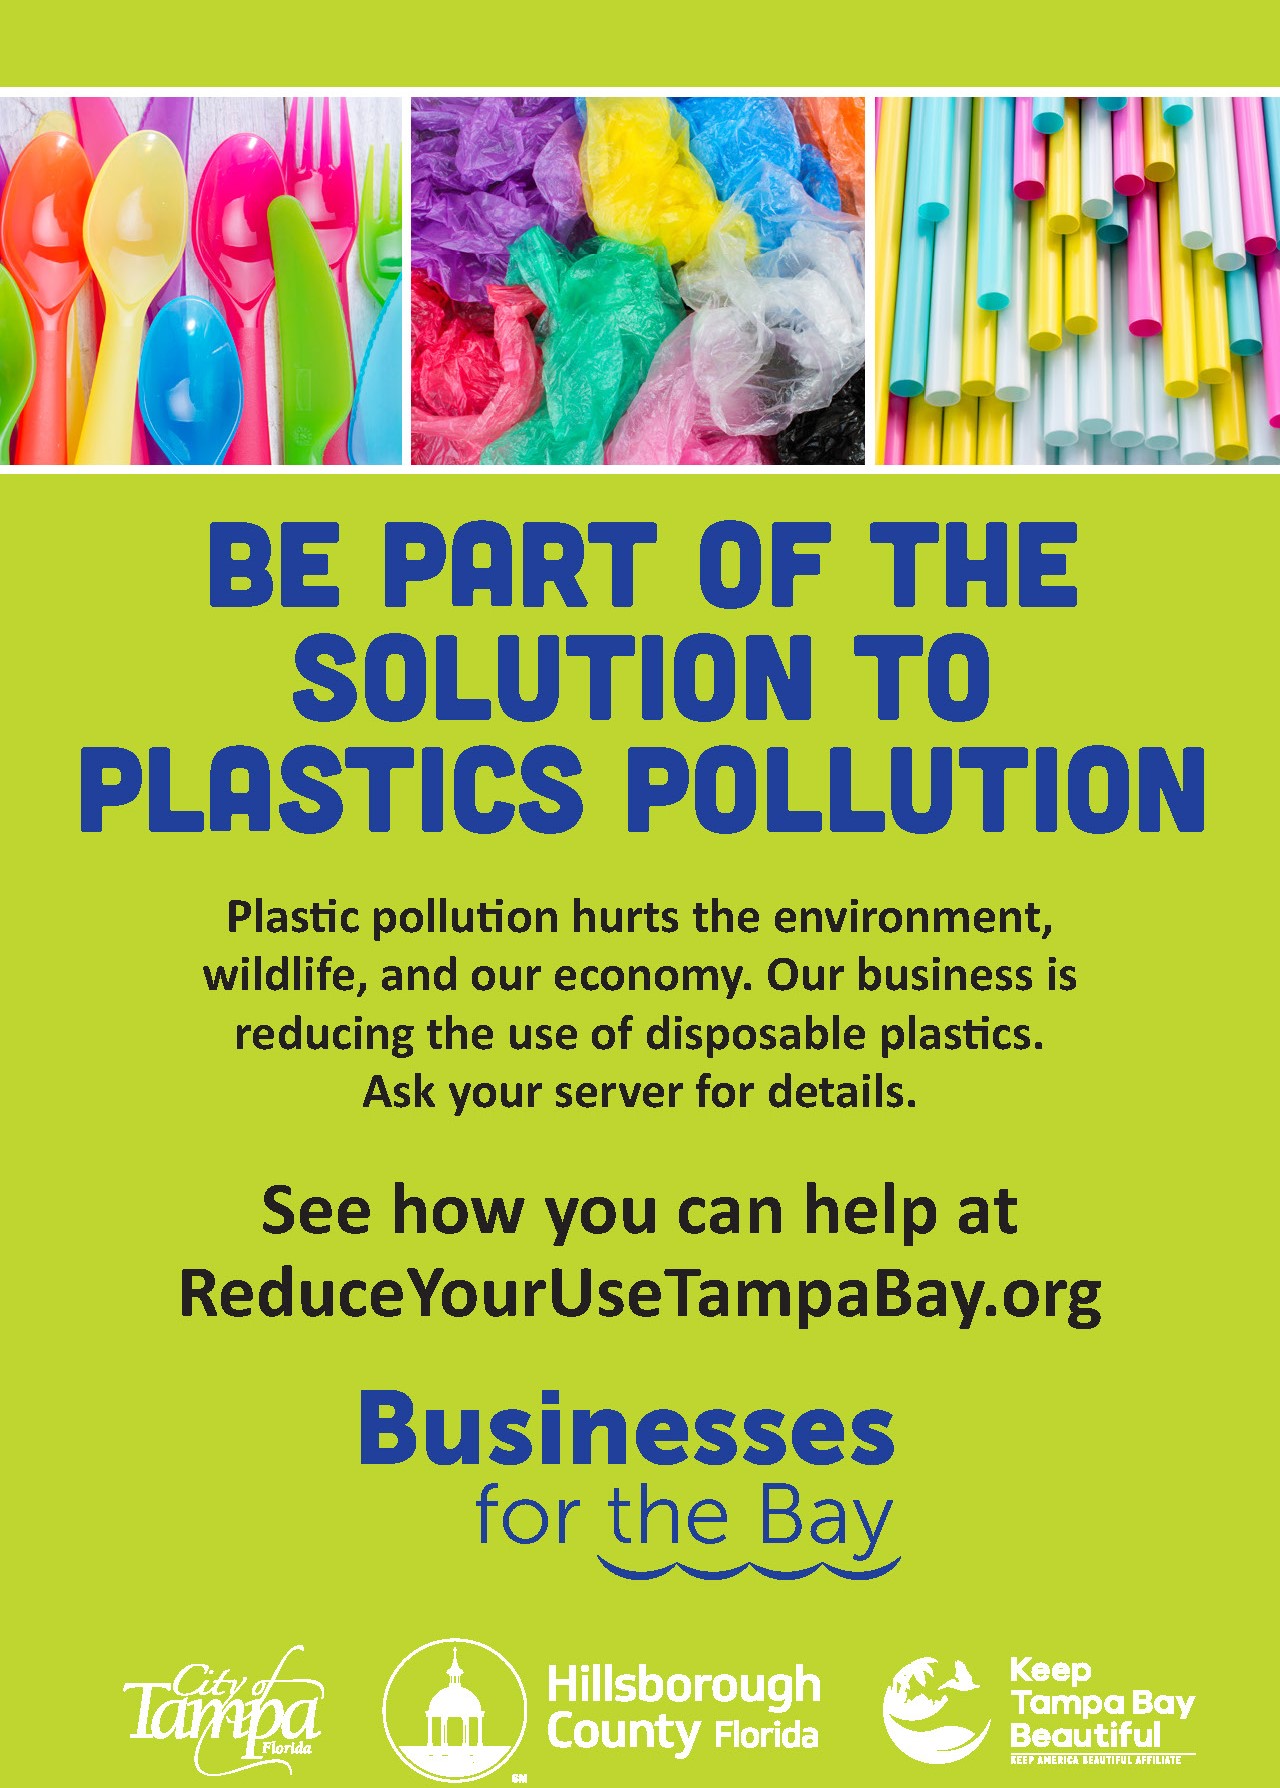 Reduce Your Use Campaign Sign with Single-Use Plastics like cutlery, straws, and bags